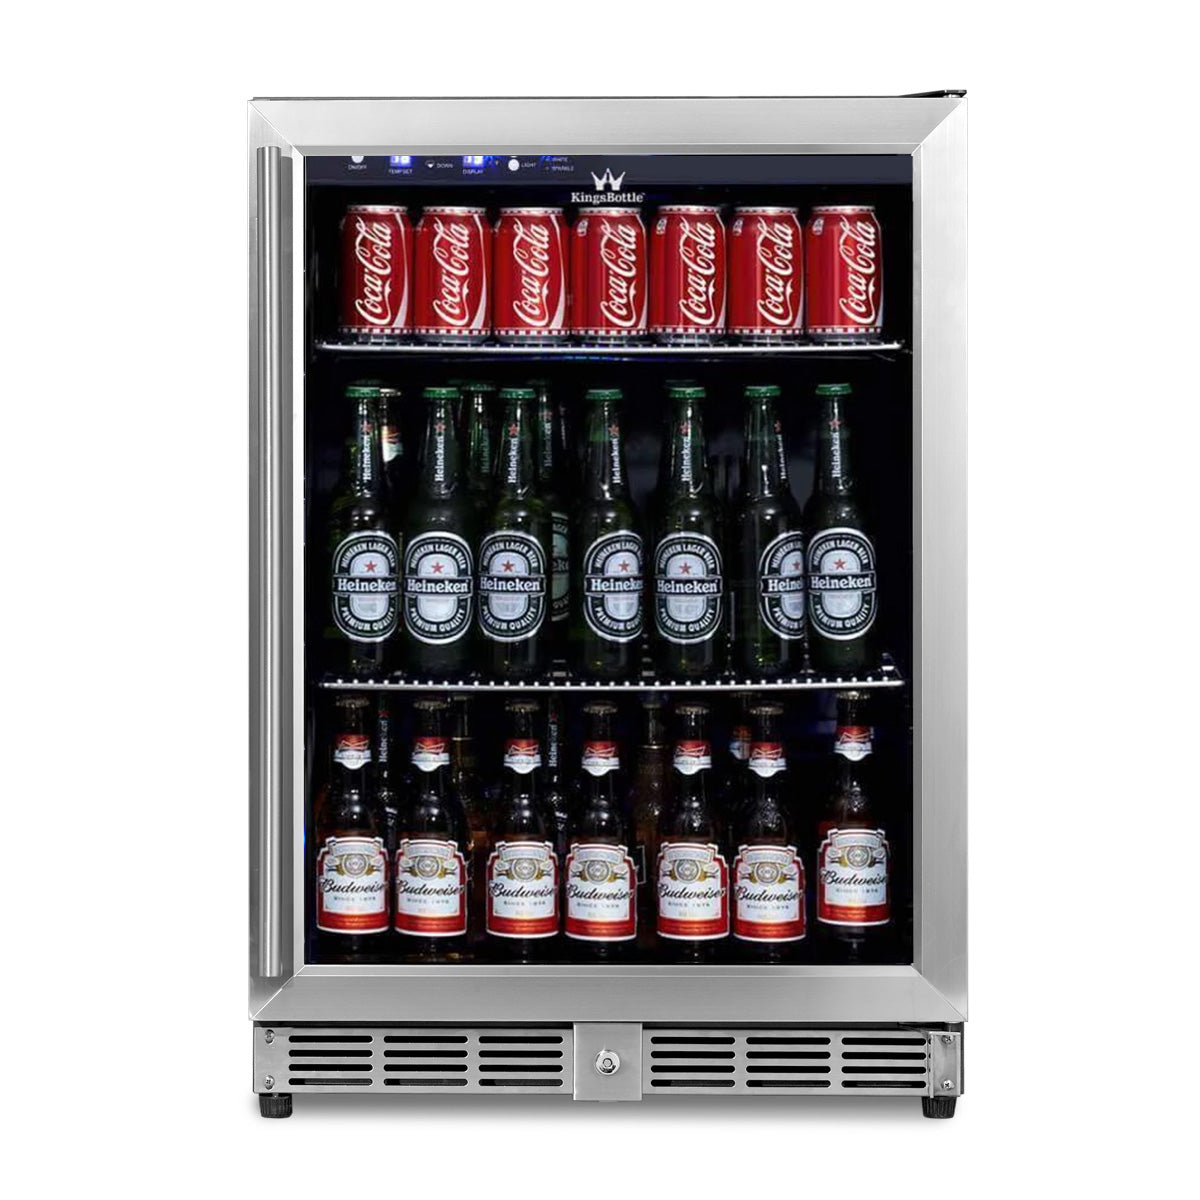 A Kings Bottle 24" Beer Cooler Fridge with glass door, stainless steel trim, and 203 can capacity.